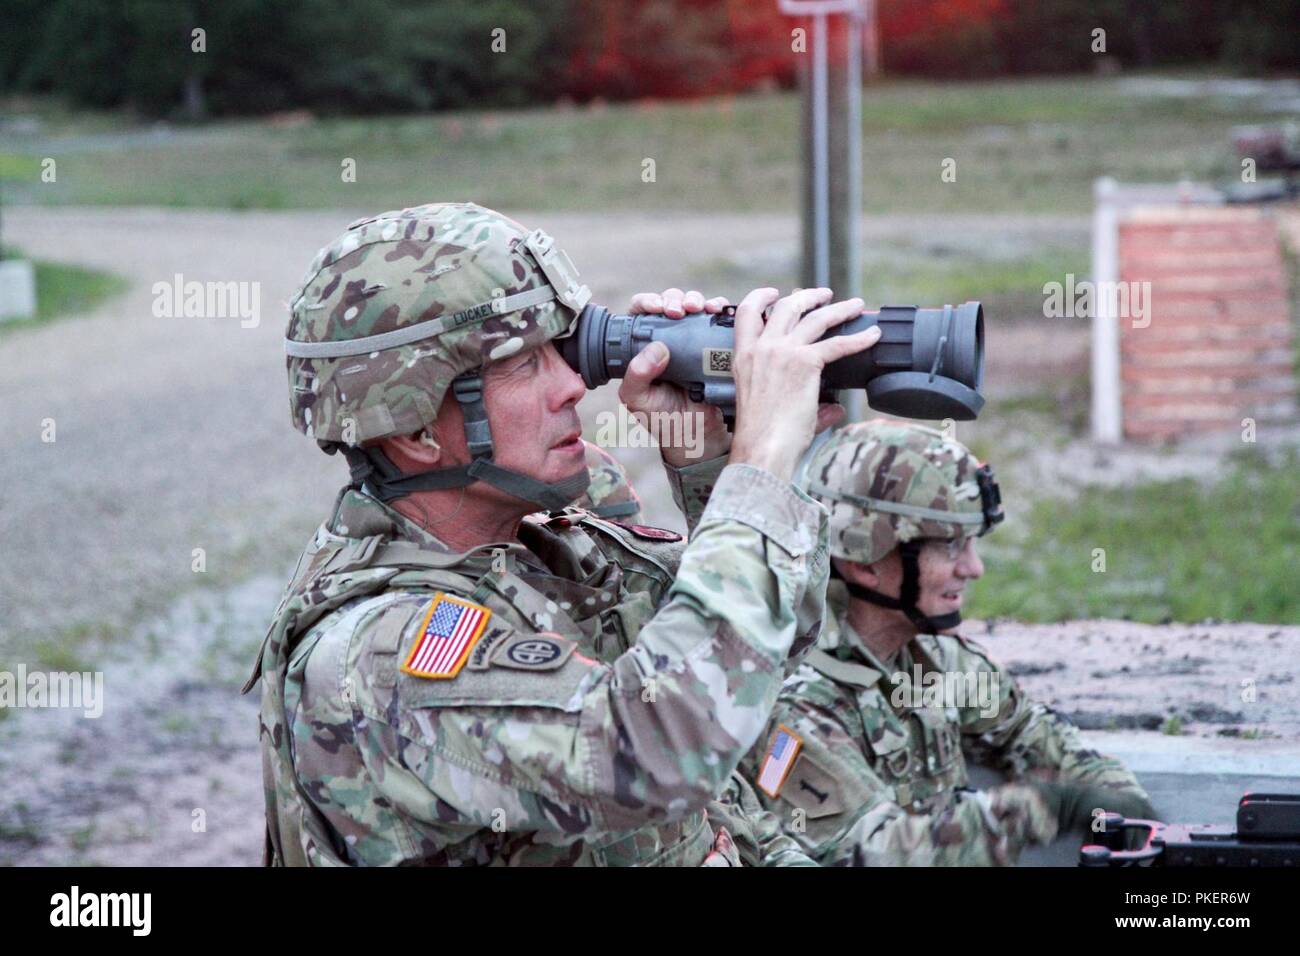 LTG Charles D. Luckey, Chief of Army Reserve and Commanding General, U.S. Army Reserve Command, looks through an AN/PAS-13 Thermal Weapon Sight, as Maj. Gen. A. Ray Royalty, commanding general, 84th Training Command, watches the lane during Task Force Ultimate, Operation Cold Steel II, hosted by U.S. Army Civil Affairs and Psychological Operation Command (Airborne) at Joint Base McGuire-Dix-Lakehurst, N.J., July 25, 2018. Operation Cold Steel is the U.S. Army Reserve’s crew-served weapons qualification and validation exercise to ensure that America’s Army Reserve units and Soldiers are trained Stock Photo